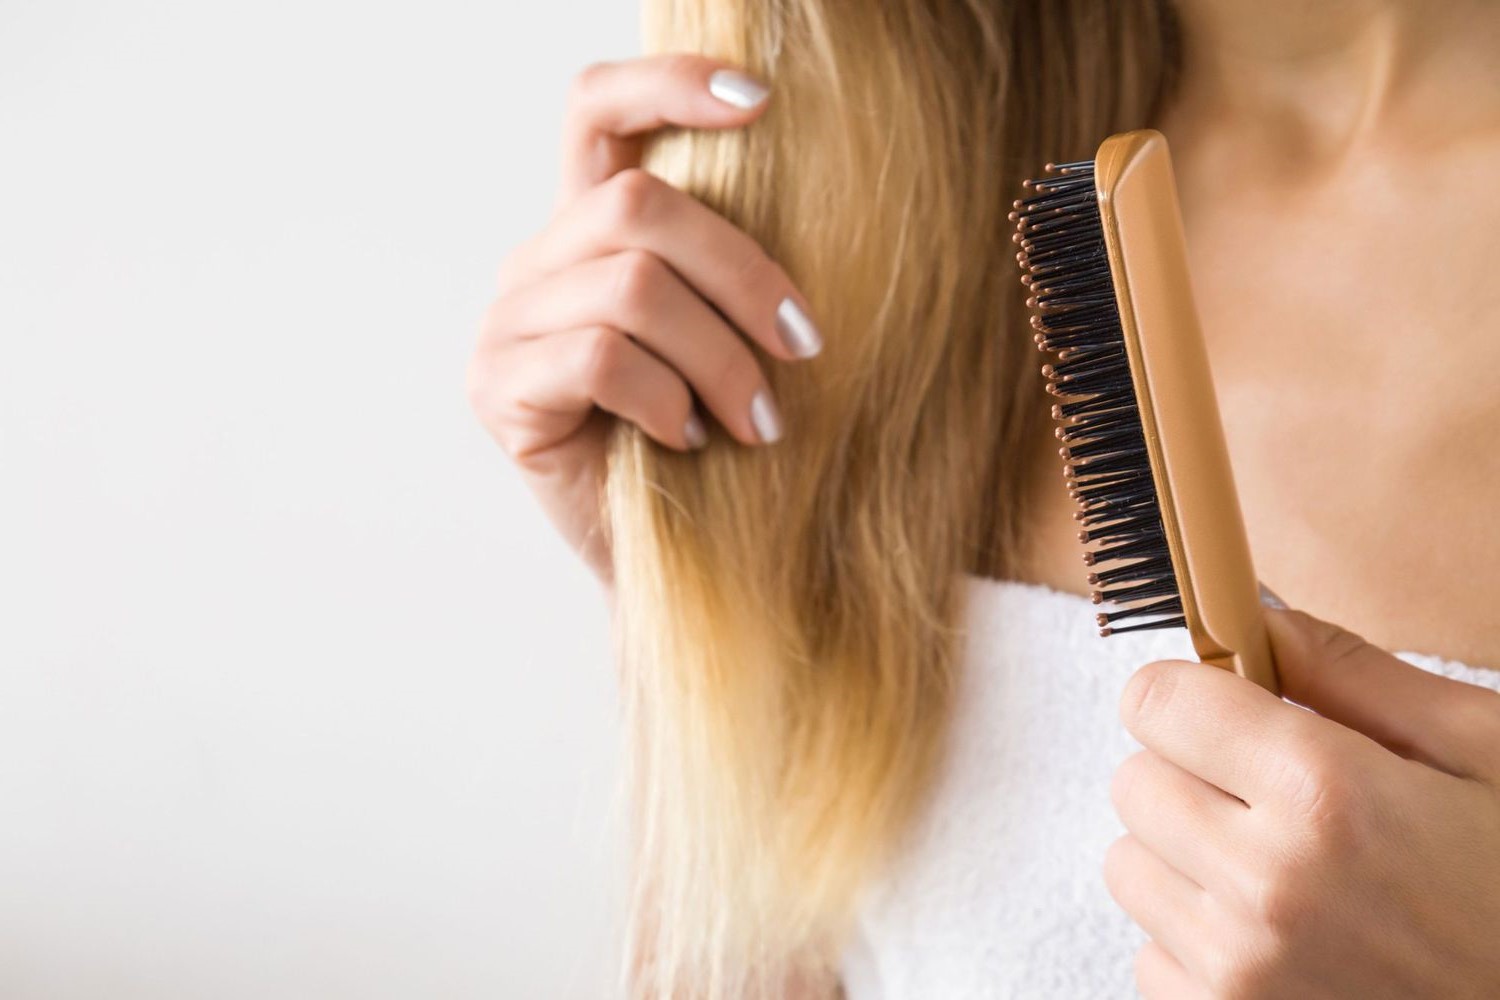 How To Clean A Hairbrush